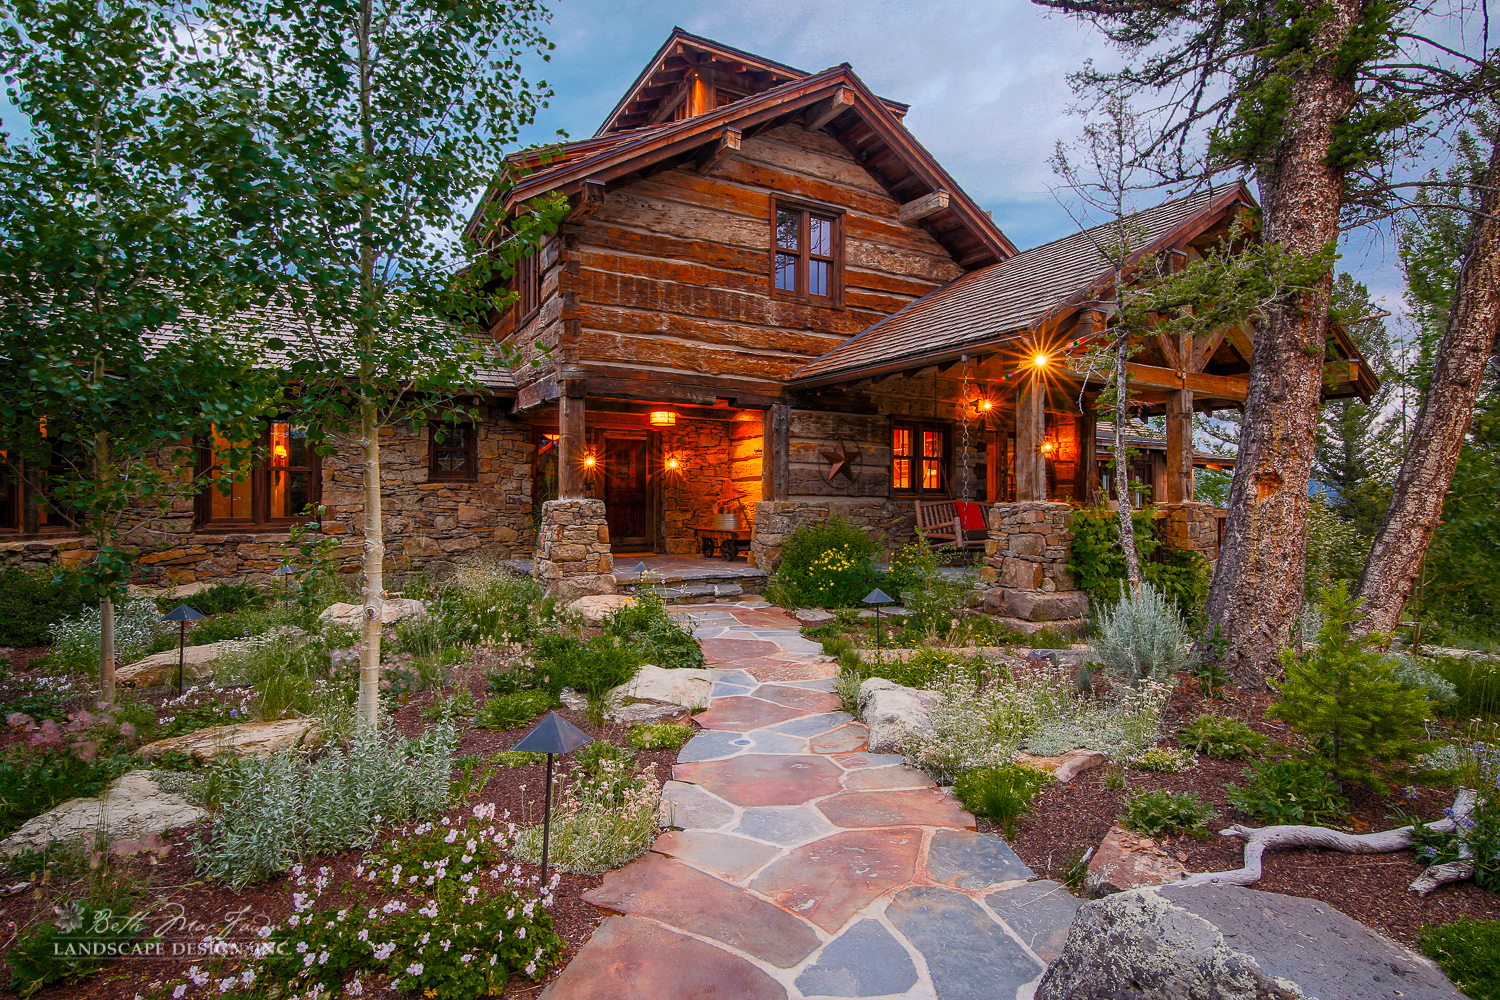 Photo of timber framed home with rock pathways and garden beds